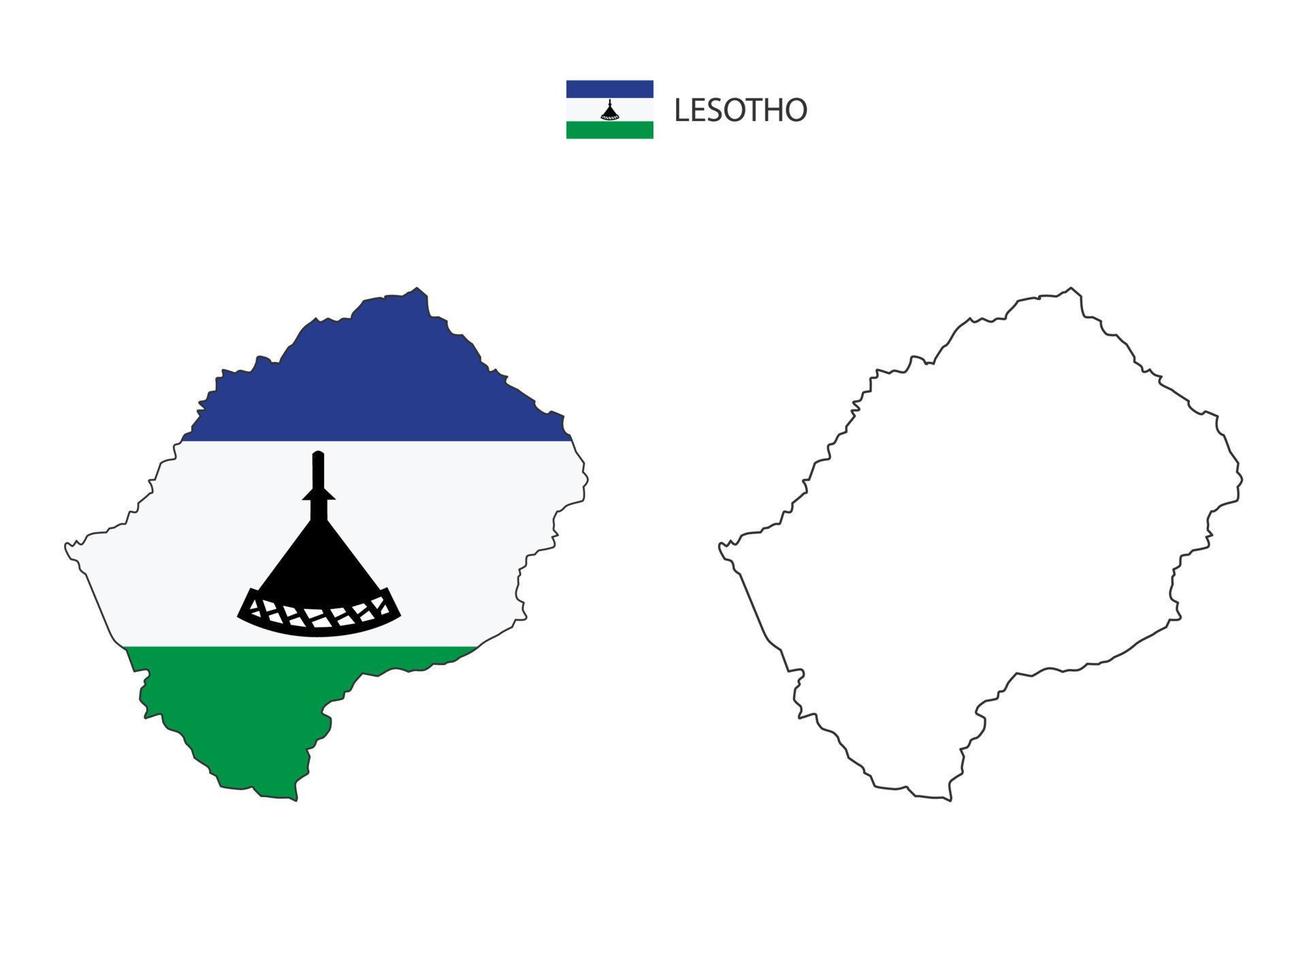 Lesotho map city vector divided by outline simplicity style. Have 2 versions, black thin line version and color of country flag version. Both map were on the white background.